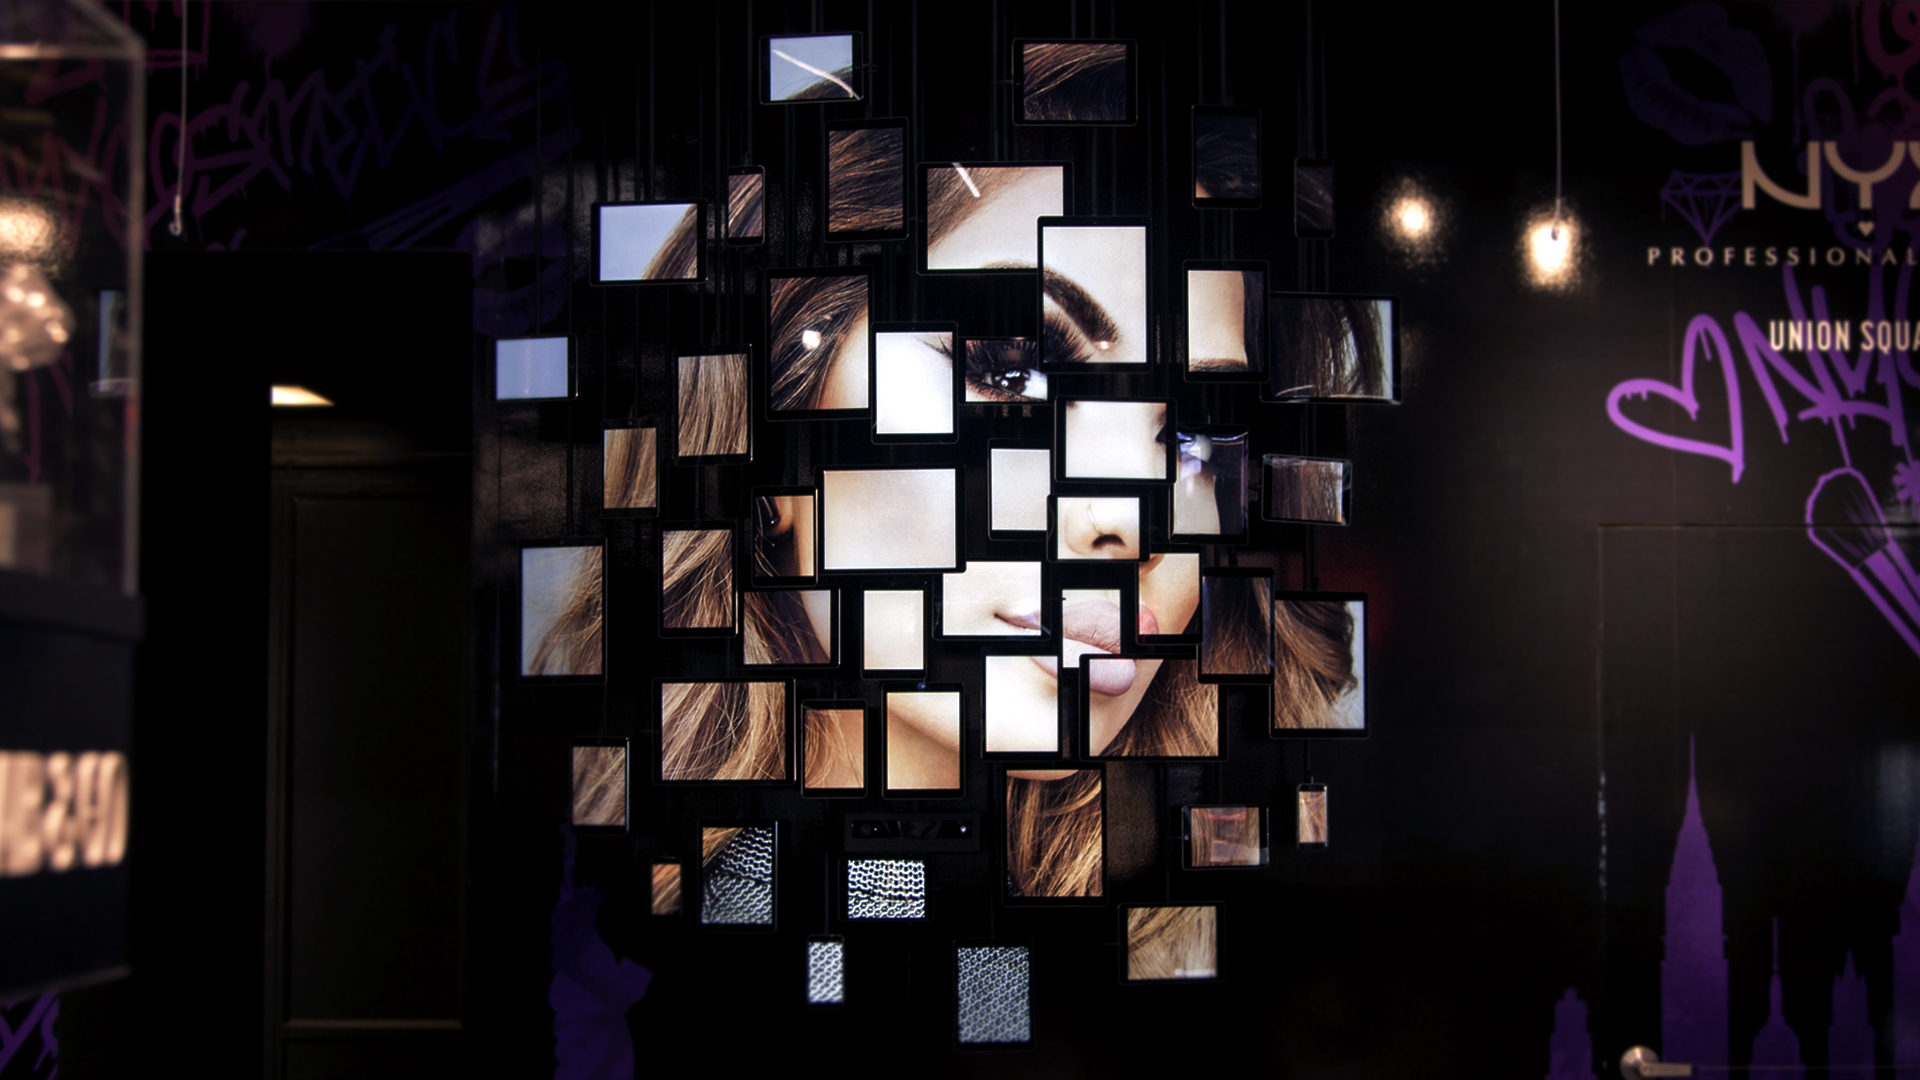 NYX Color Cast - interactive installation sculpture that loads Instagram images based on the color of your shirt